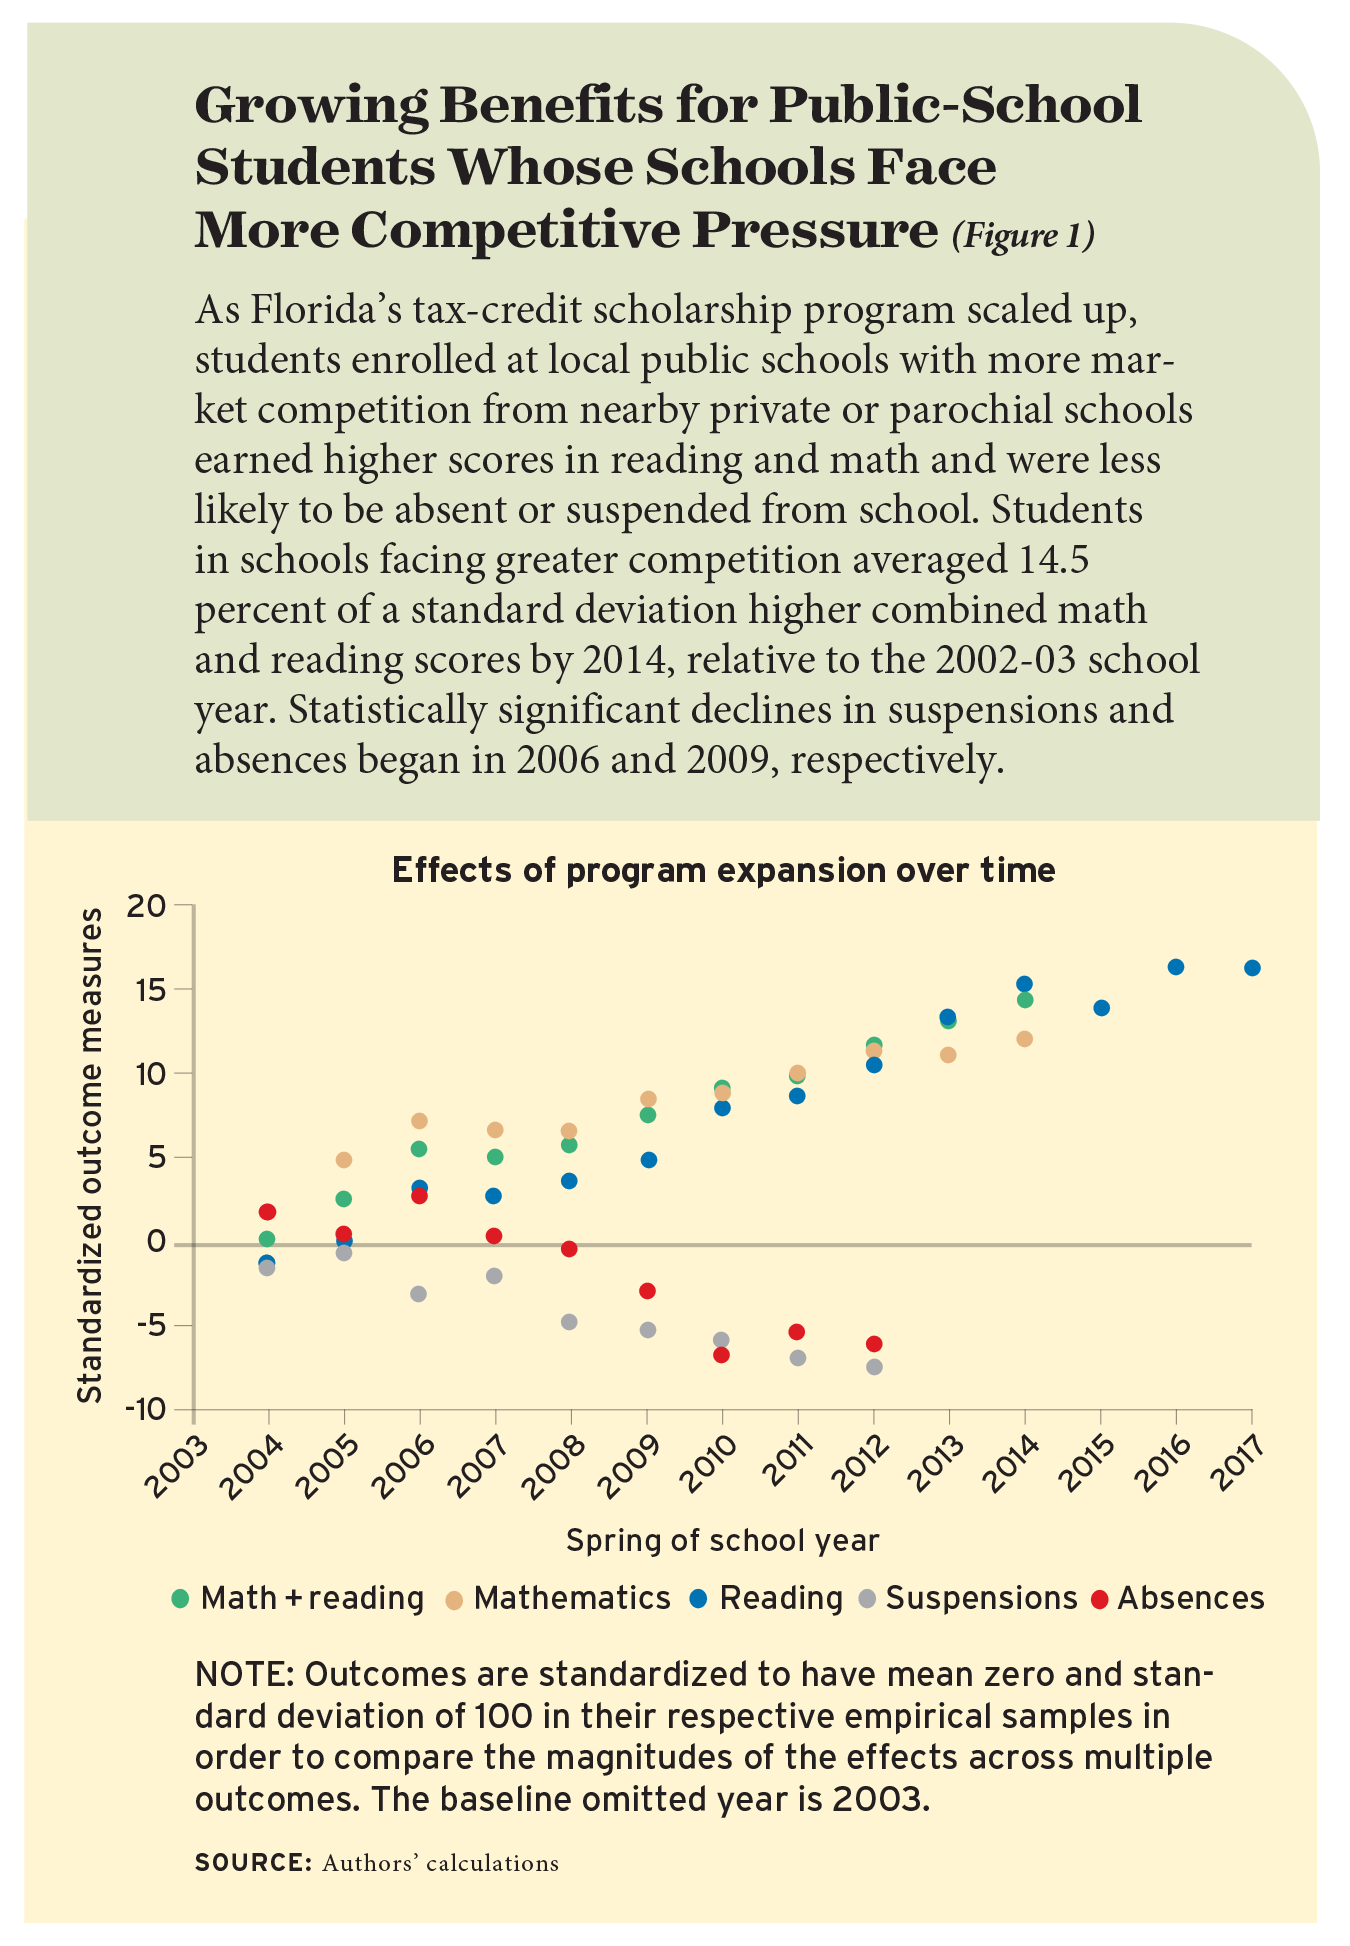 Figure 1: Growing Benefits for Public-School Students Whose Schools Face More Competitive Pressure